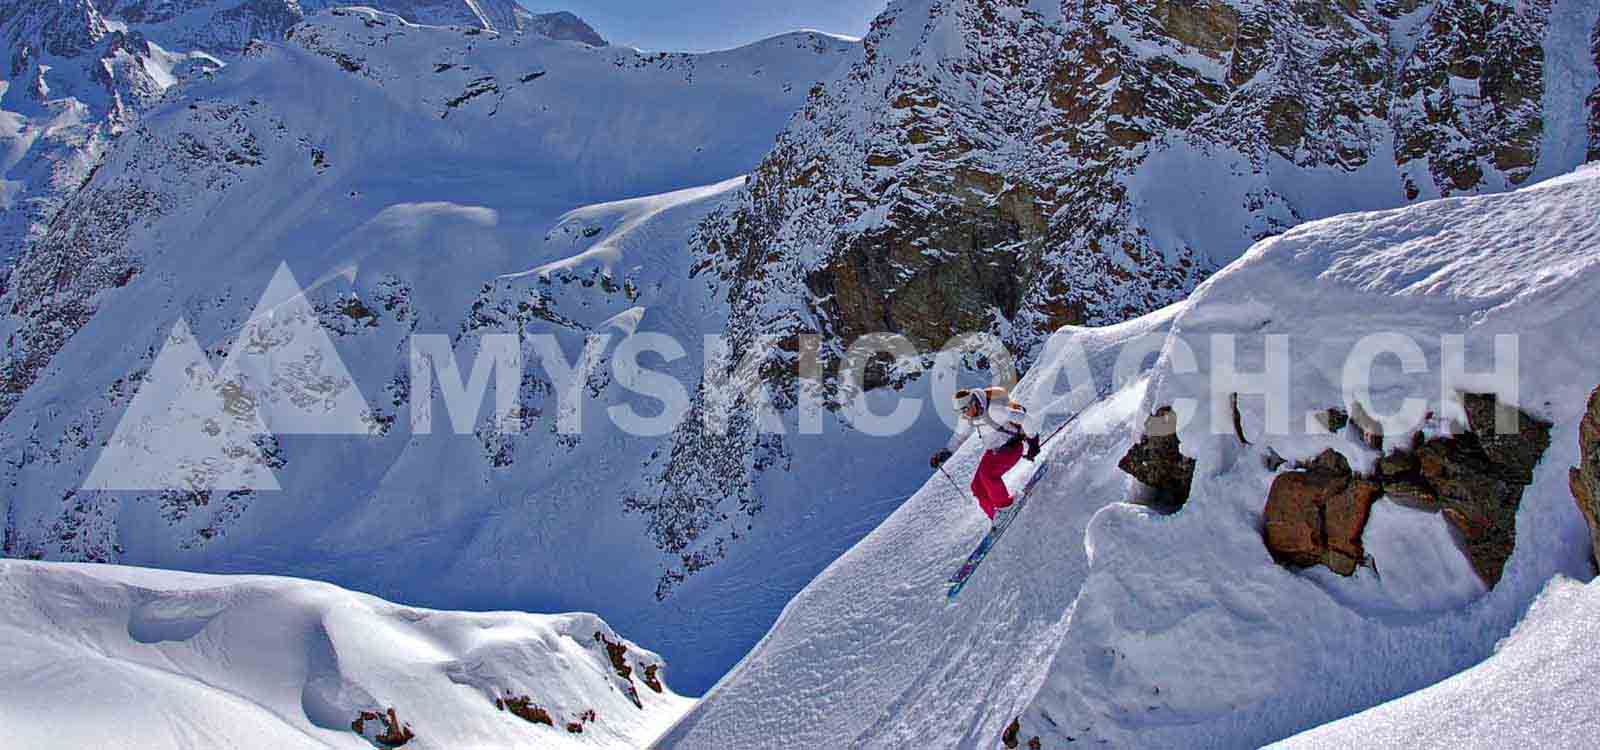 Off piste advanced private ski lessons for adults - Freeride ski coaching